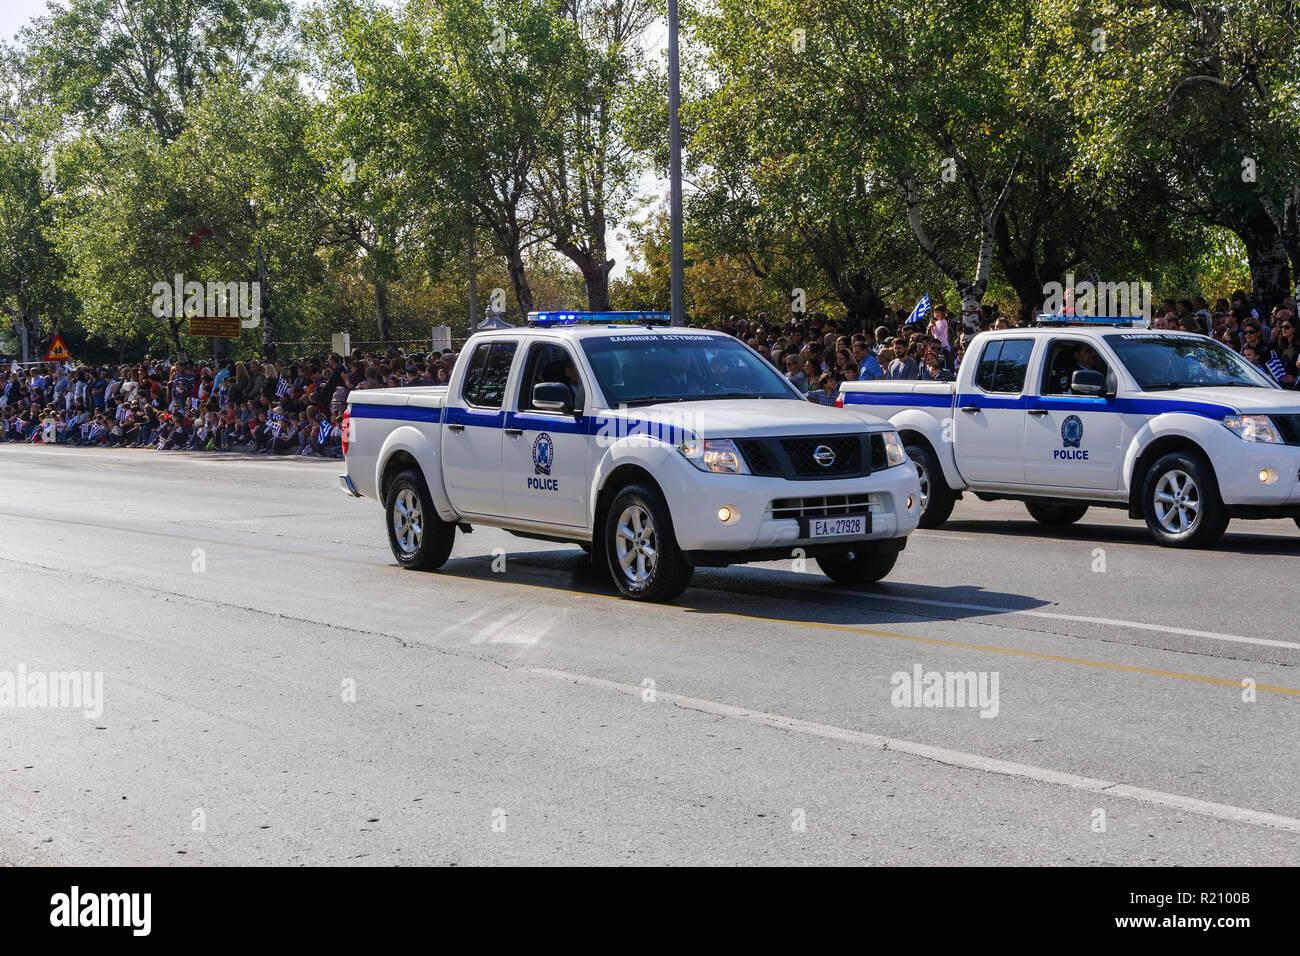 Hellenic Police Pick up cars during Oxi Day parade in Thessaloniki, Greece. Greek police - Ellinikii Astynomia Security forces trucks with personnel. Stock Photo